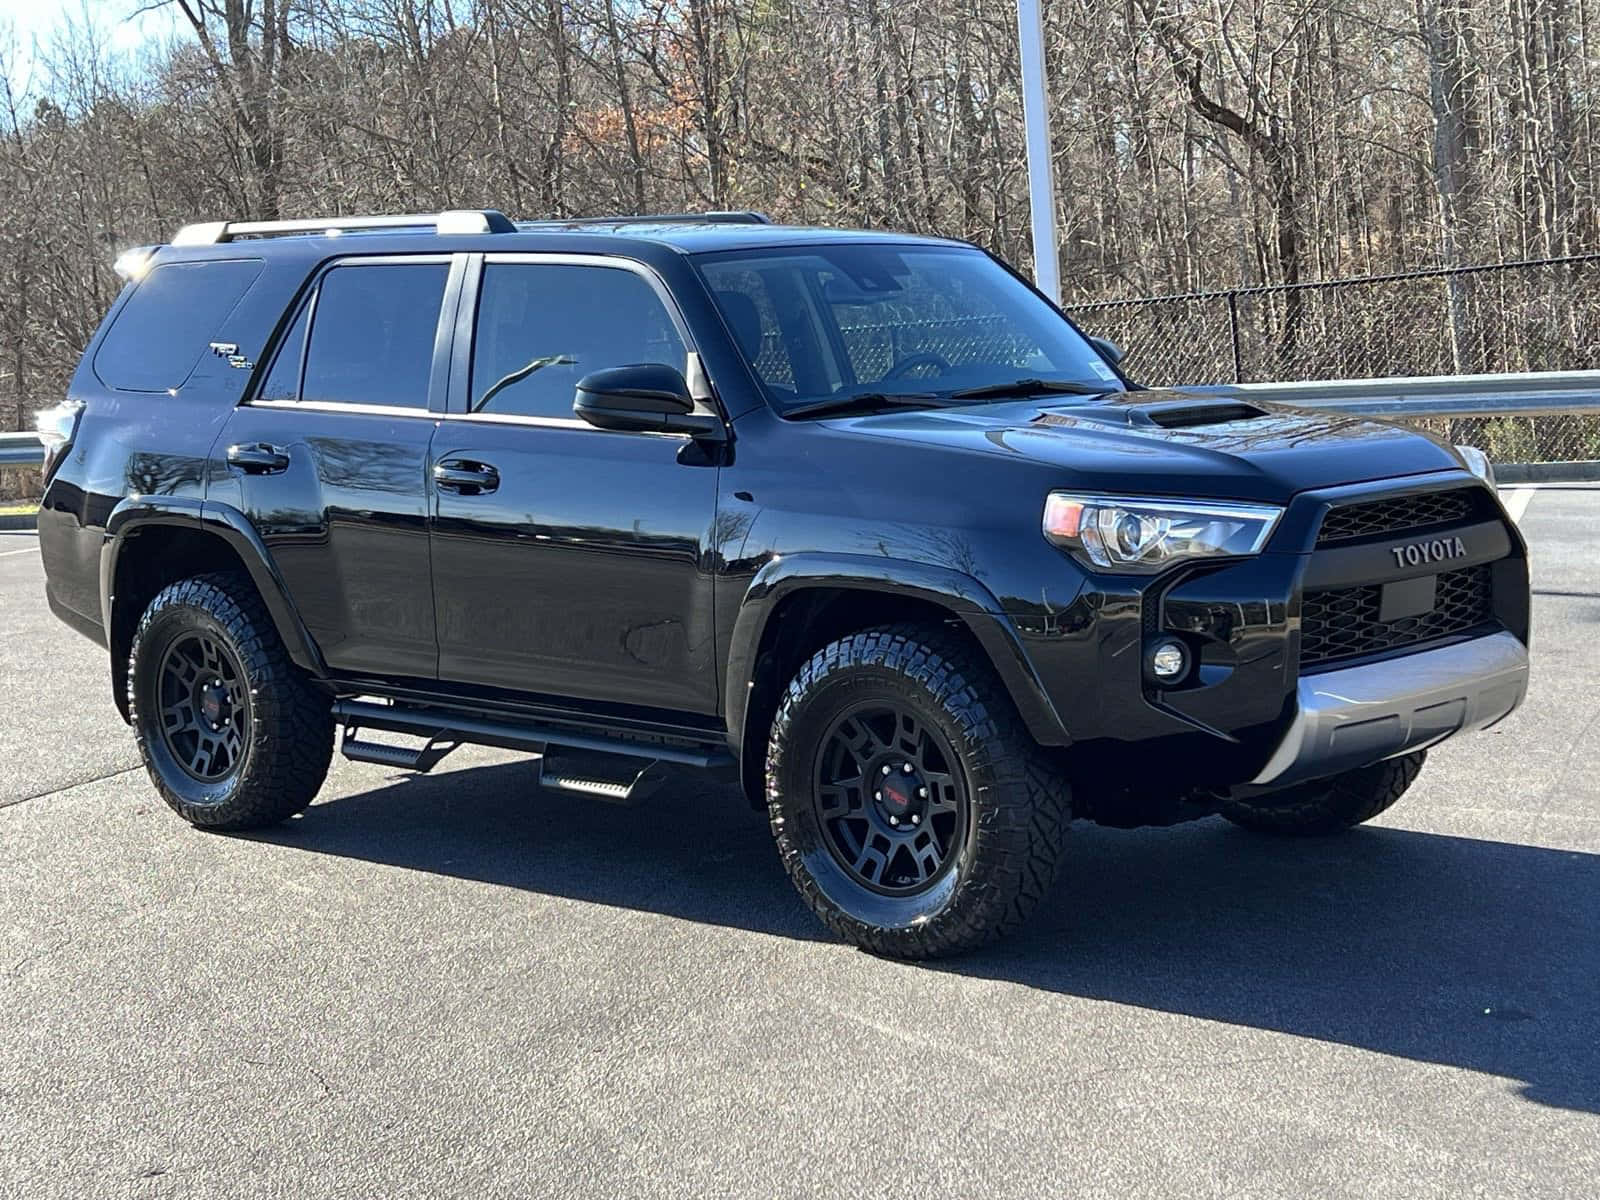 A Black Toyota 4runner Is Parked In A Parking Lot